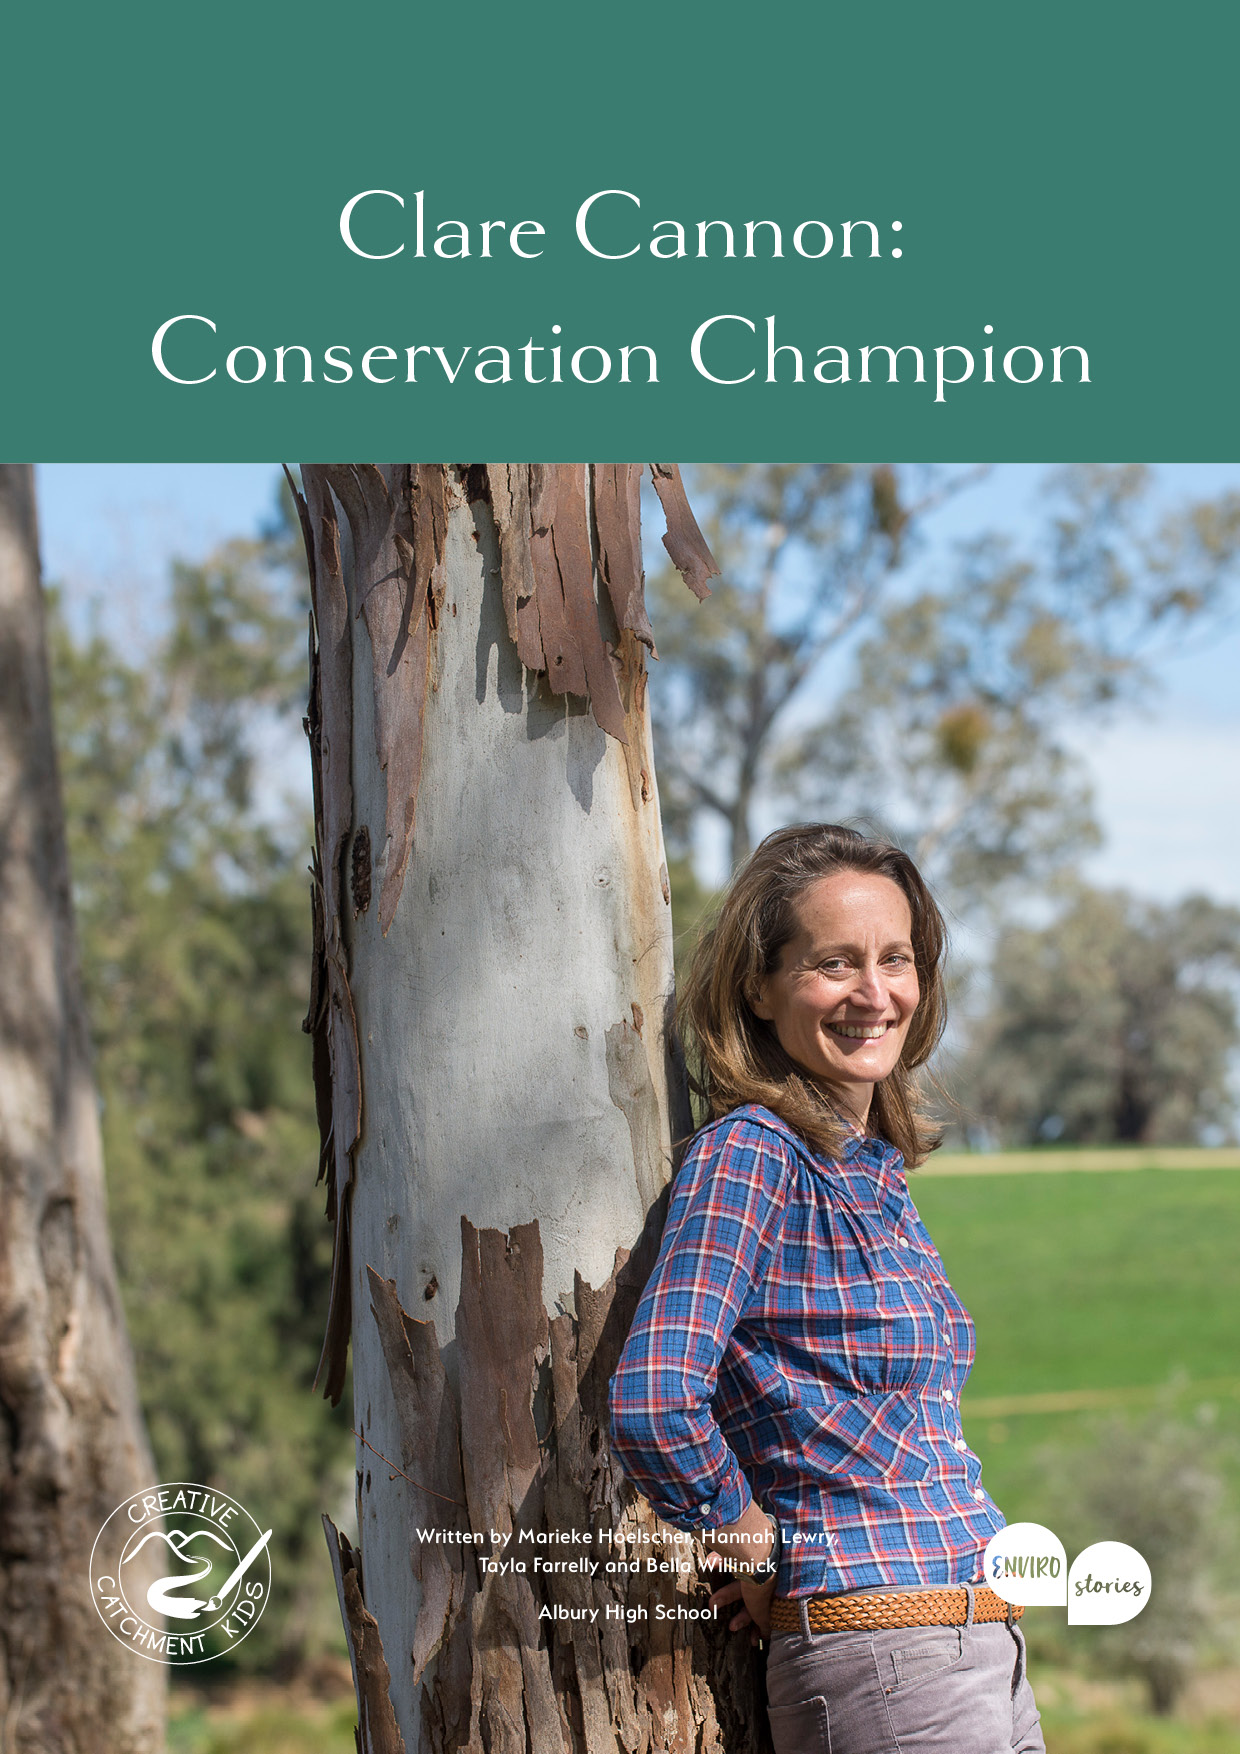 Clare Cannon: Conservation Champion